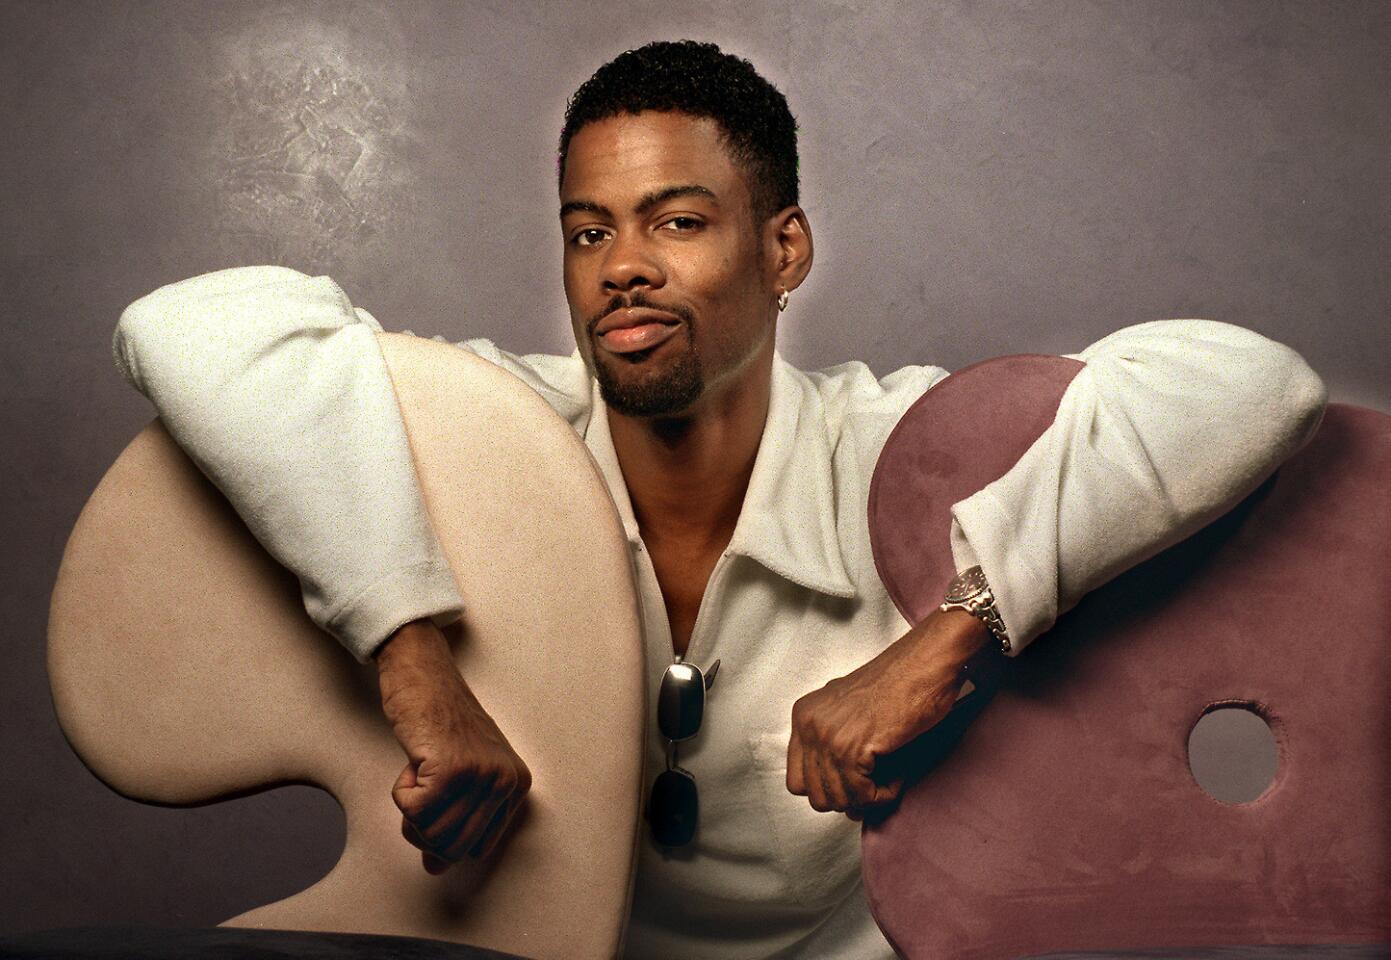 Christopher Julius "Chris" Rock III has been called one of the greatest stand-up comics. He's also a producer, director, writer and actor. Let's look at career highlights.